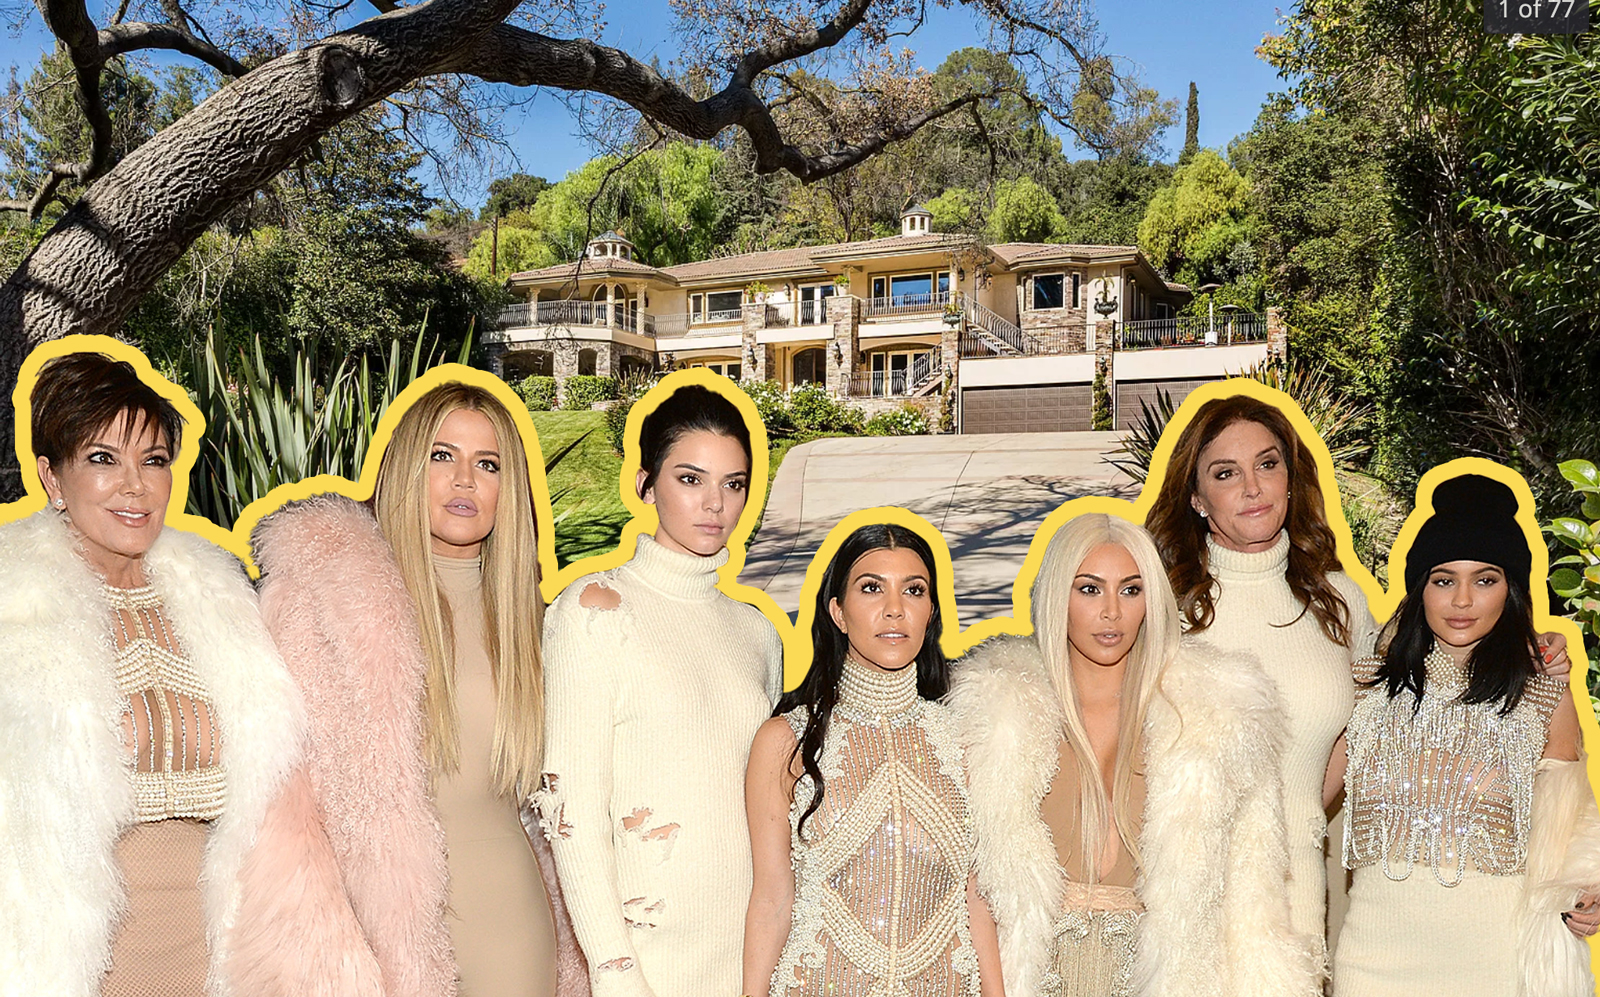 The Studio City house that stood in for Kris Jenner’s home on “Keeping Up With The Kardashians” is back on the market (Photos via Zillow; Getty)